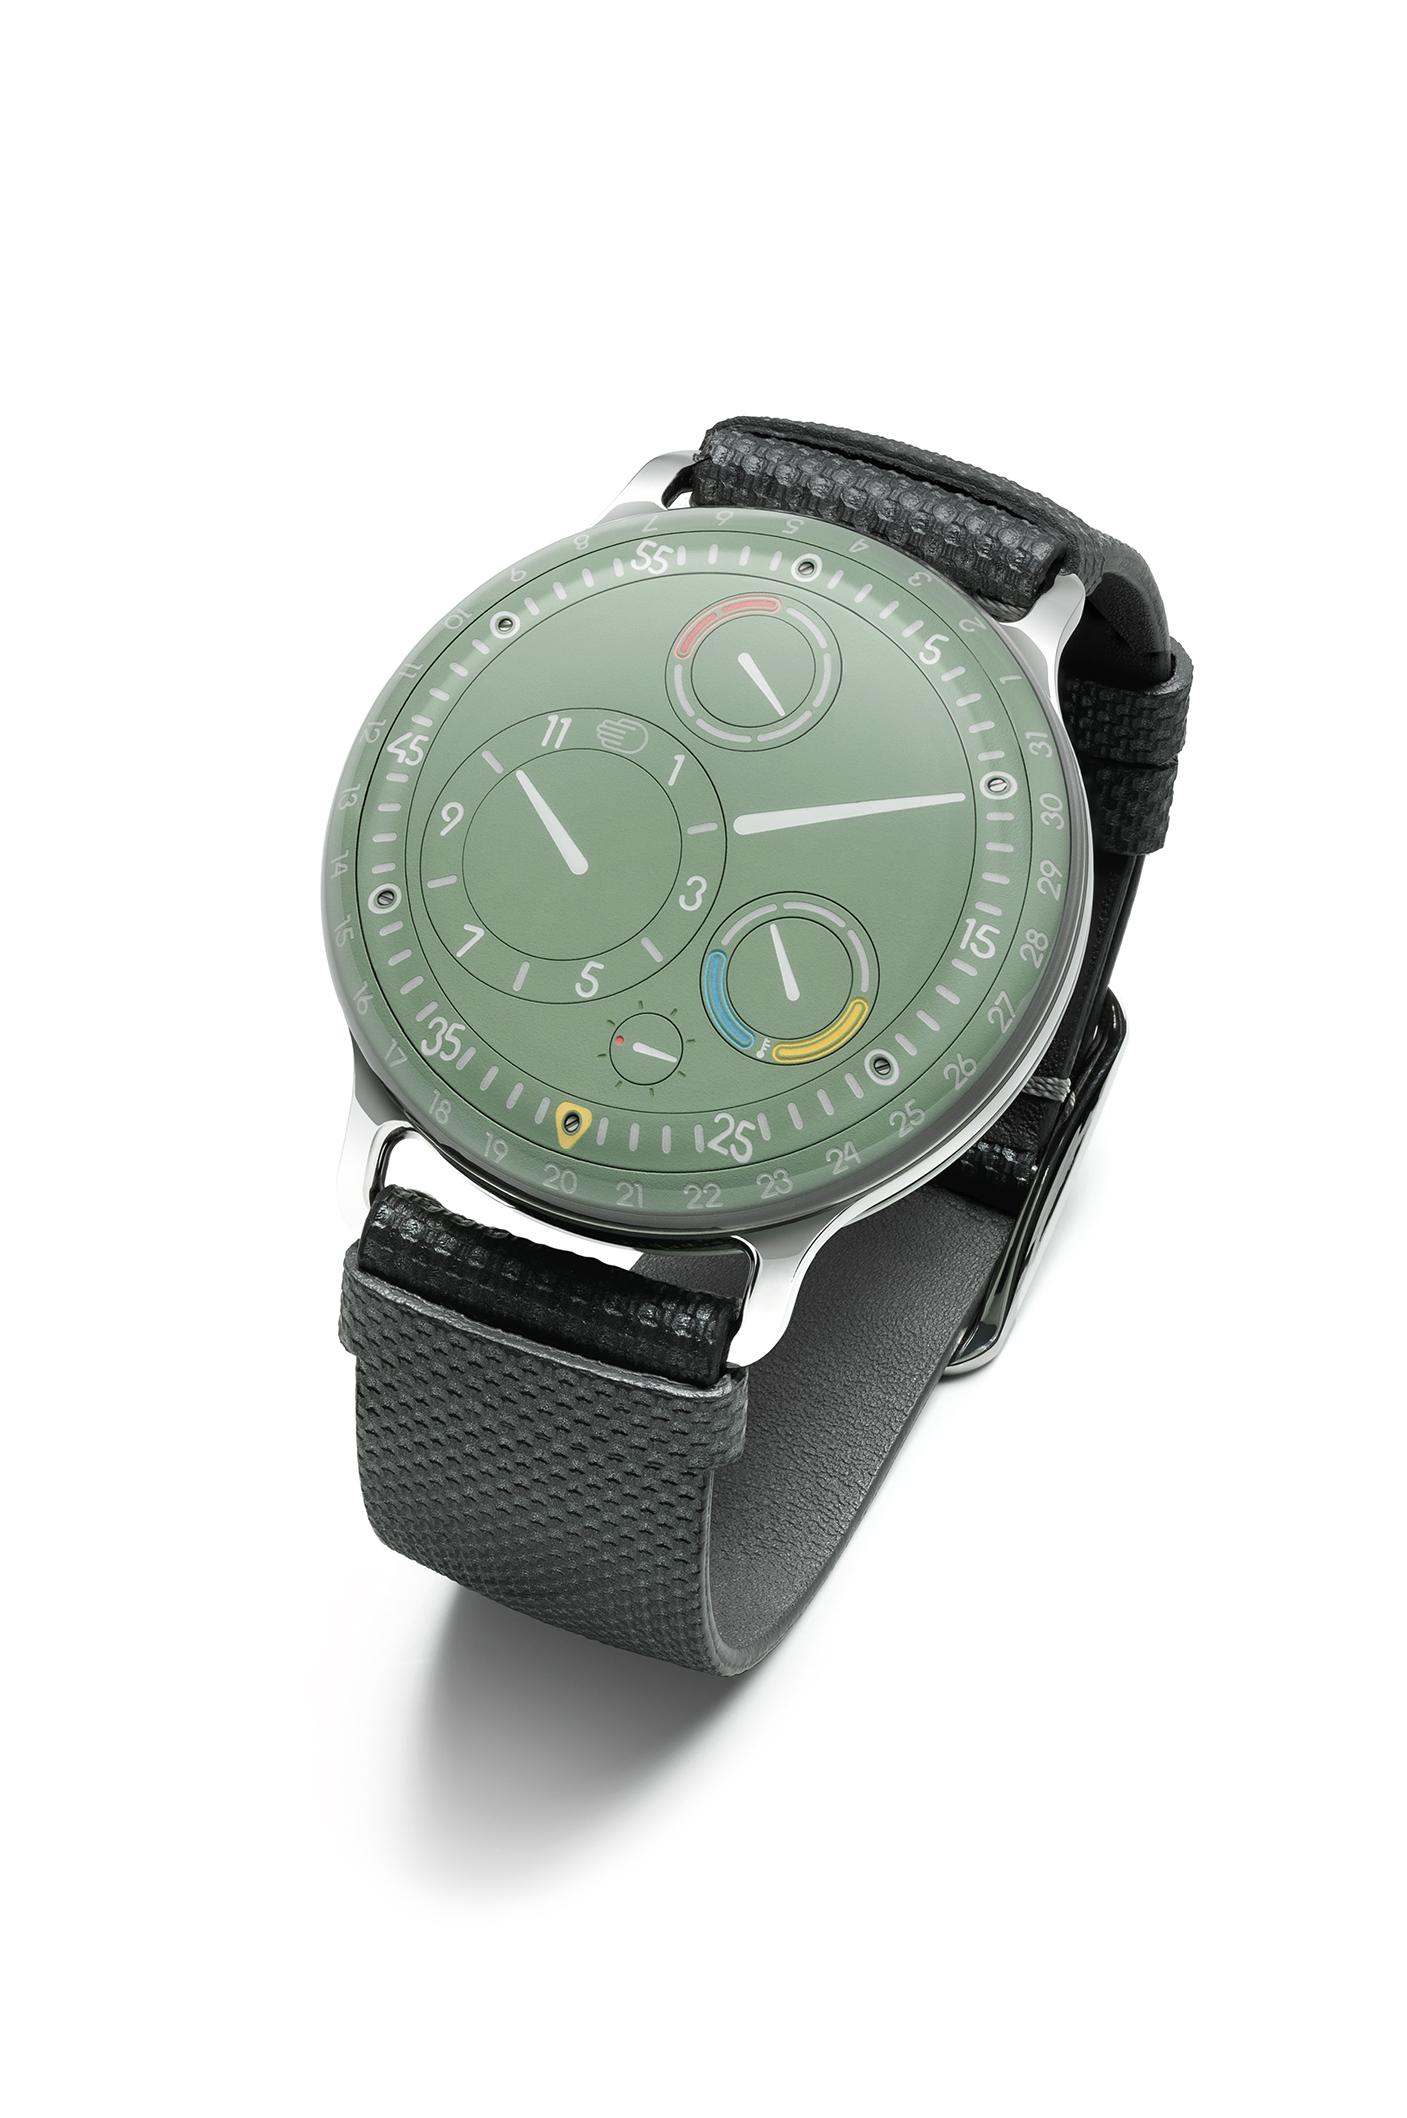 Soft as a Pebble, Green as a Leaf: Ressence Adds a New Shade to TYPE 3 Range